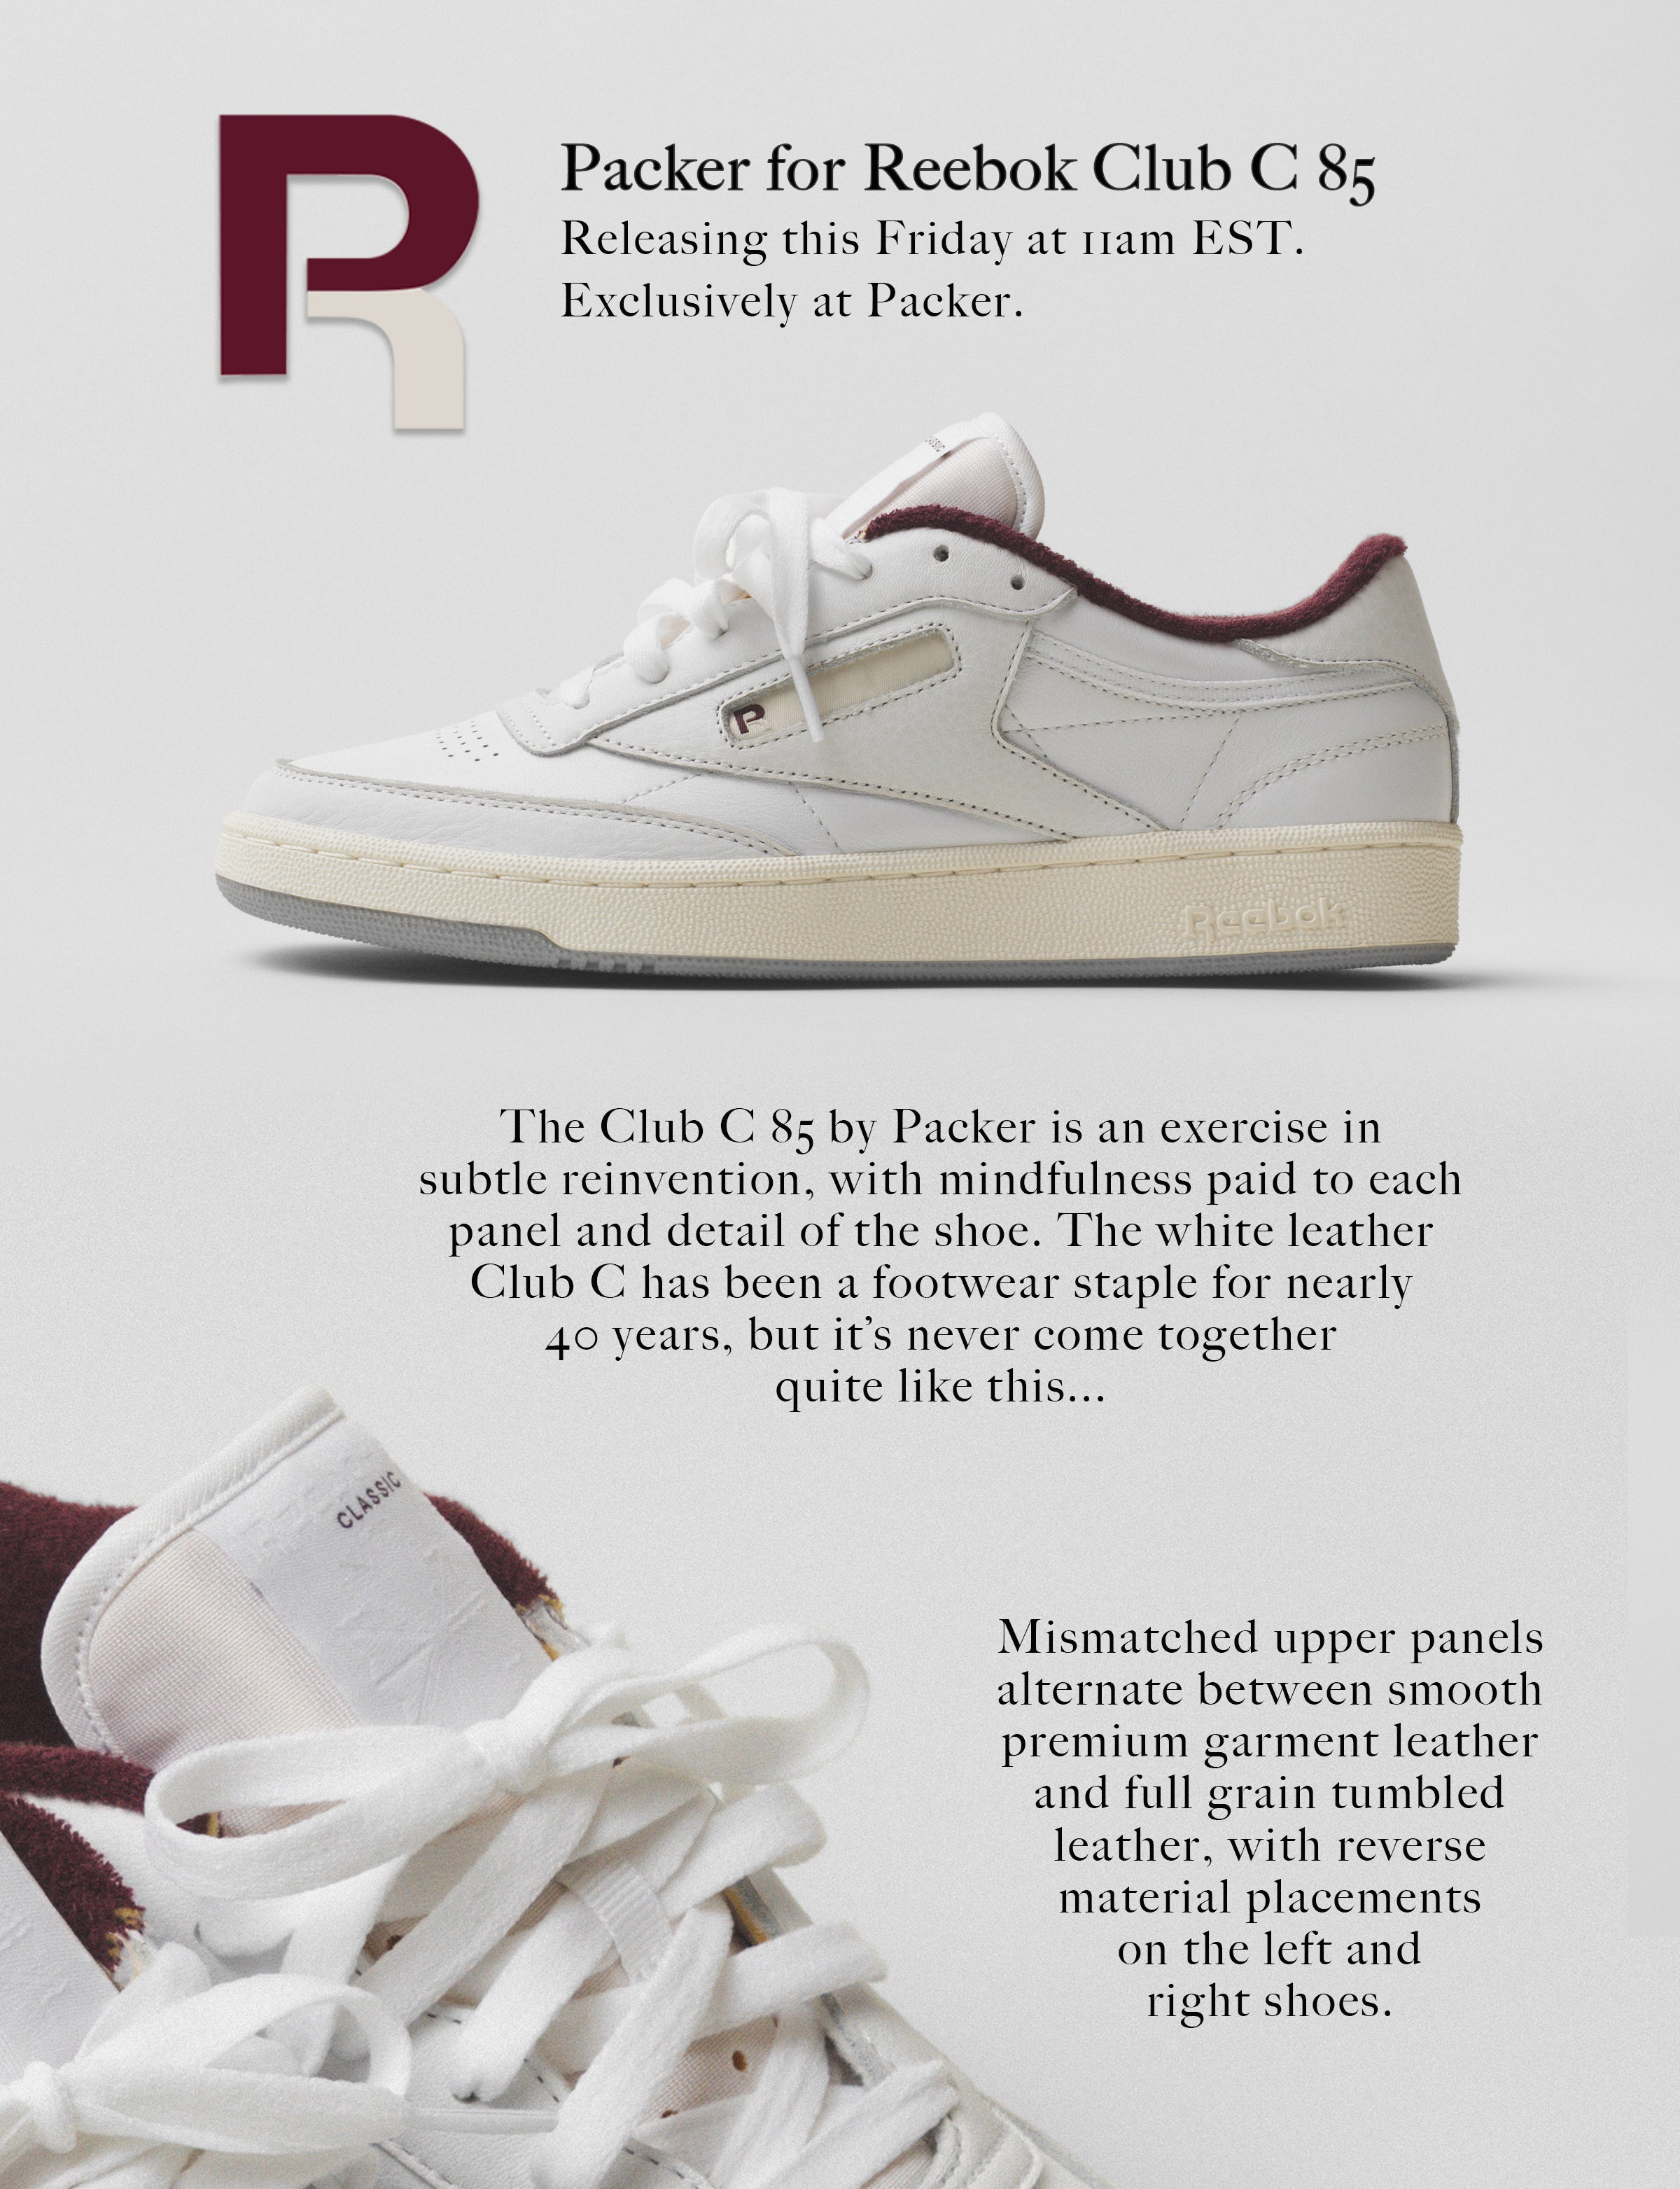 Perenne software Comparable Packer for Reebok Club C 85 – PACKER SHOES